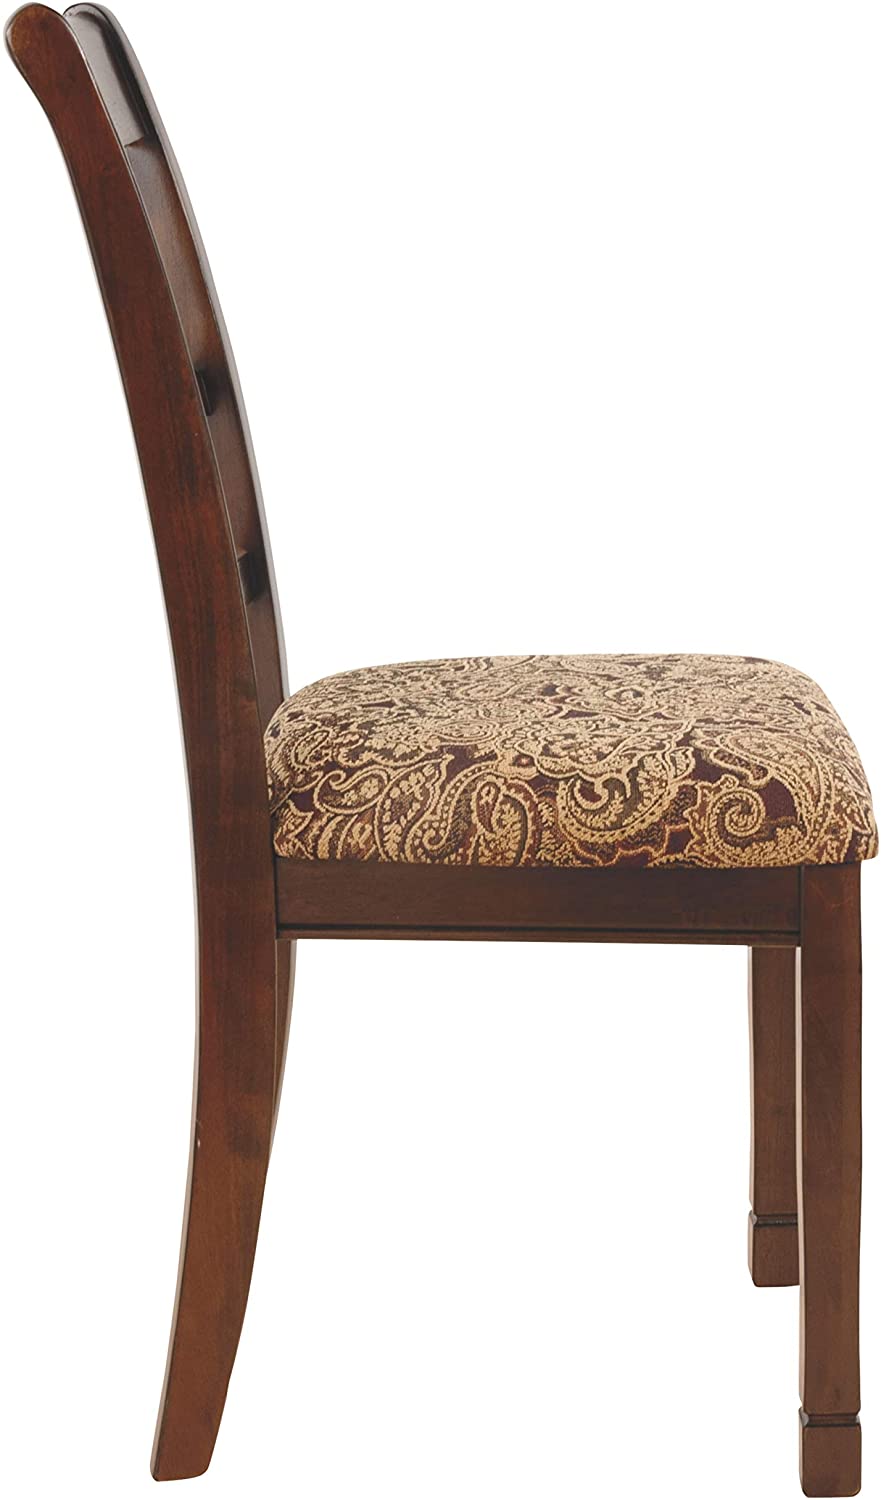 Leahlyn Dining Upholstered Side Chair - Pierced Splat Back - Set of 2 -Brown